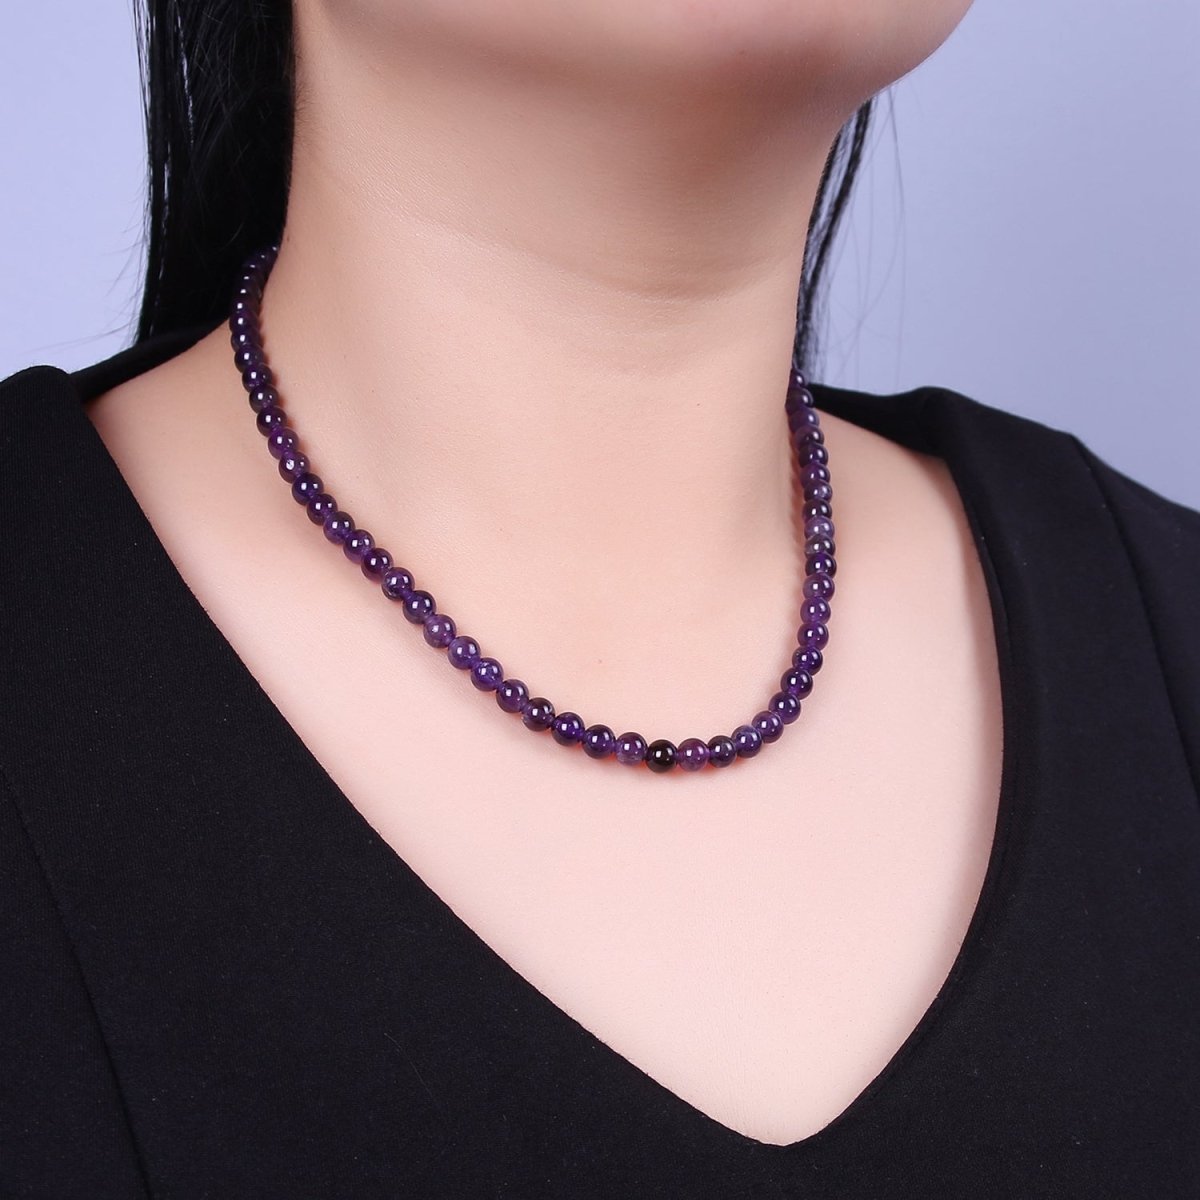 AAA++ Natural Amethyst Beaded Necklace, 6mm Purple Amethyst Smooth Round Bead Necklace 18k Gold Filled Gemstone Necklace Jewelry | WA-858 Clearance Pricing - DLUXCA